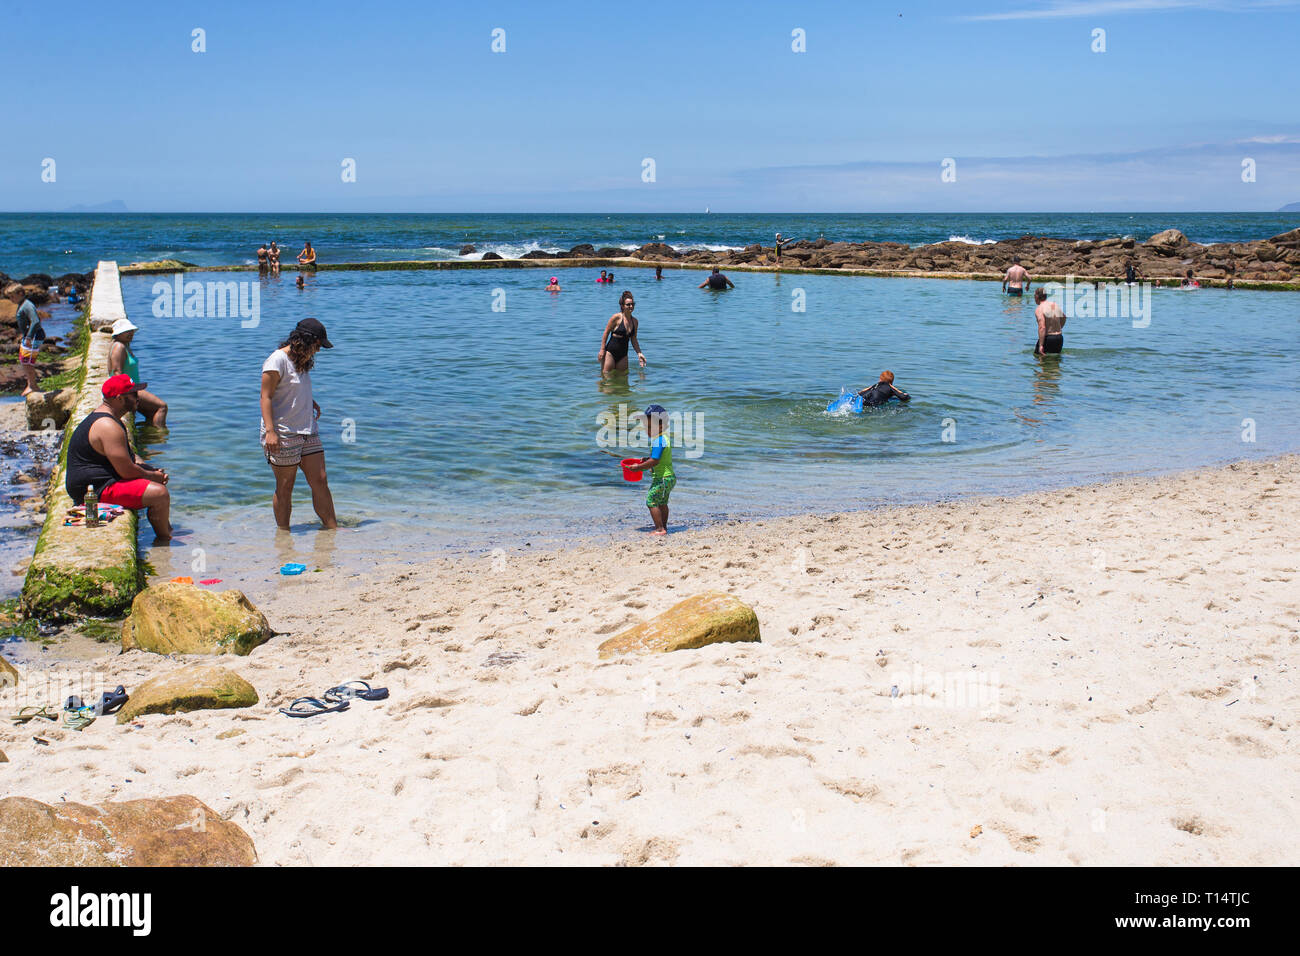 tidal swimming pool at St James beach with people cooling down  in Summer on holiday  vacation at False Bay, Cape Peninsula, Cape Town, South Africa Stock Photo